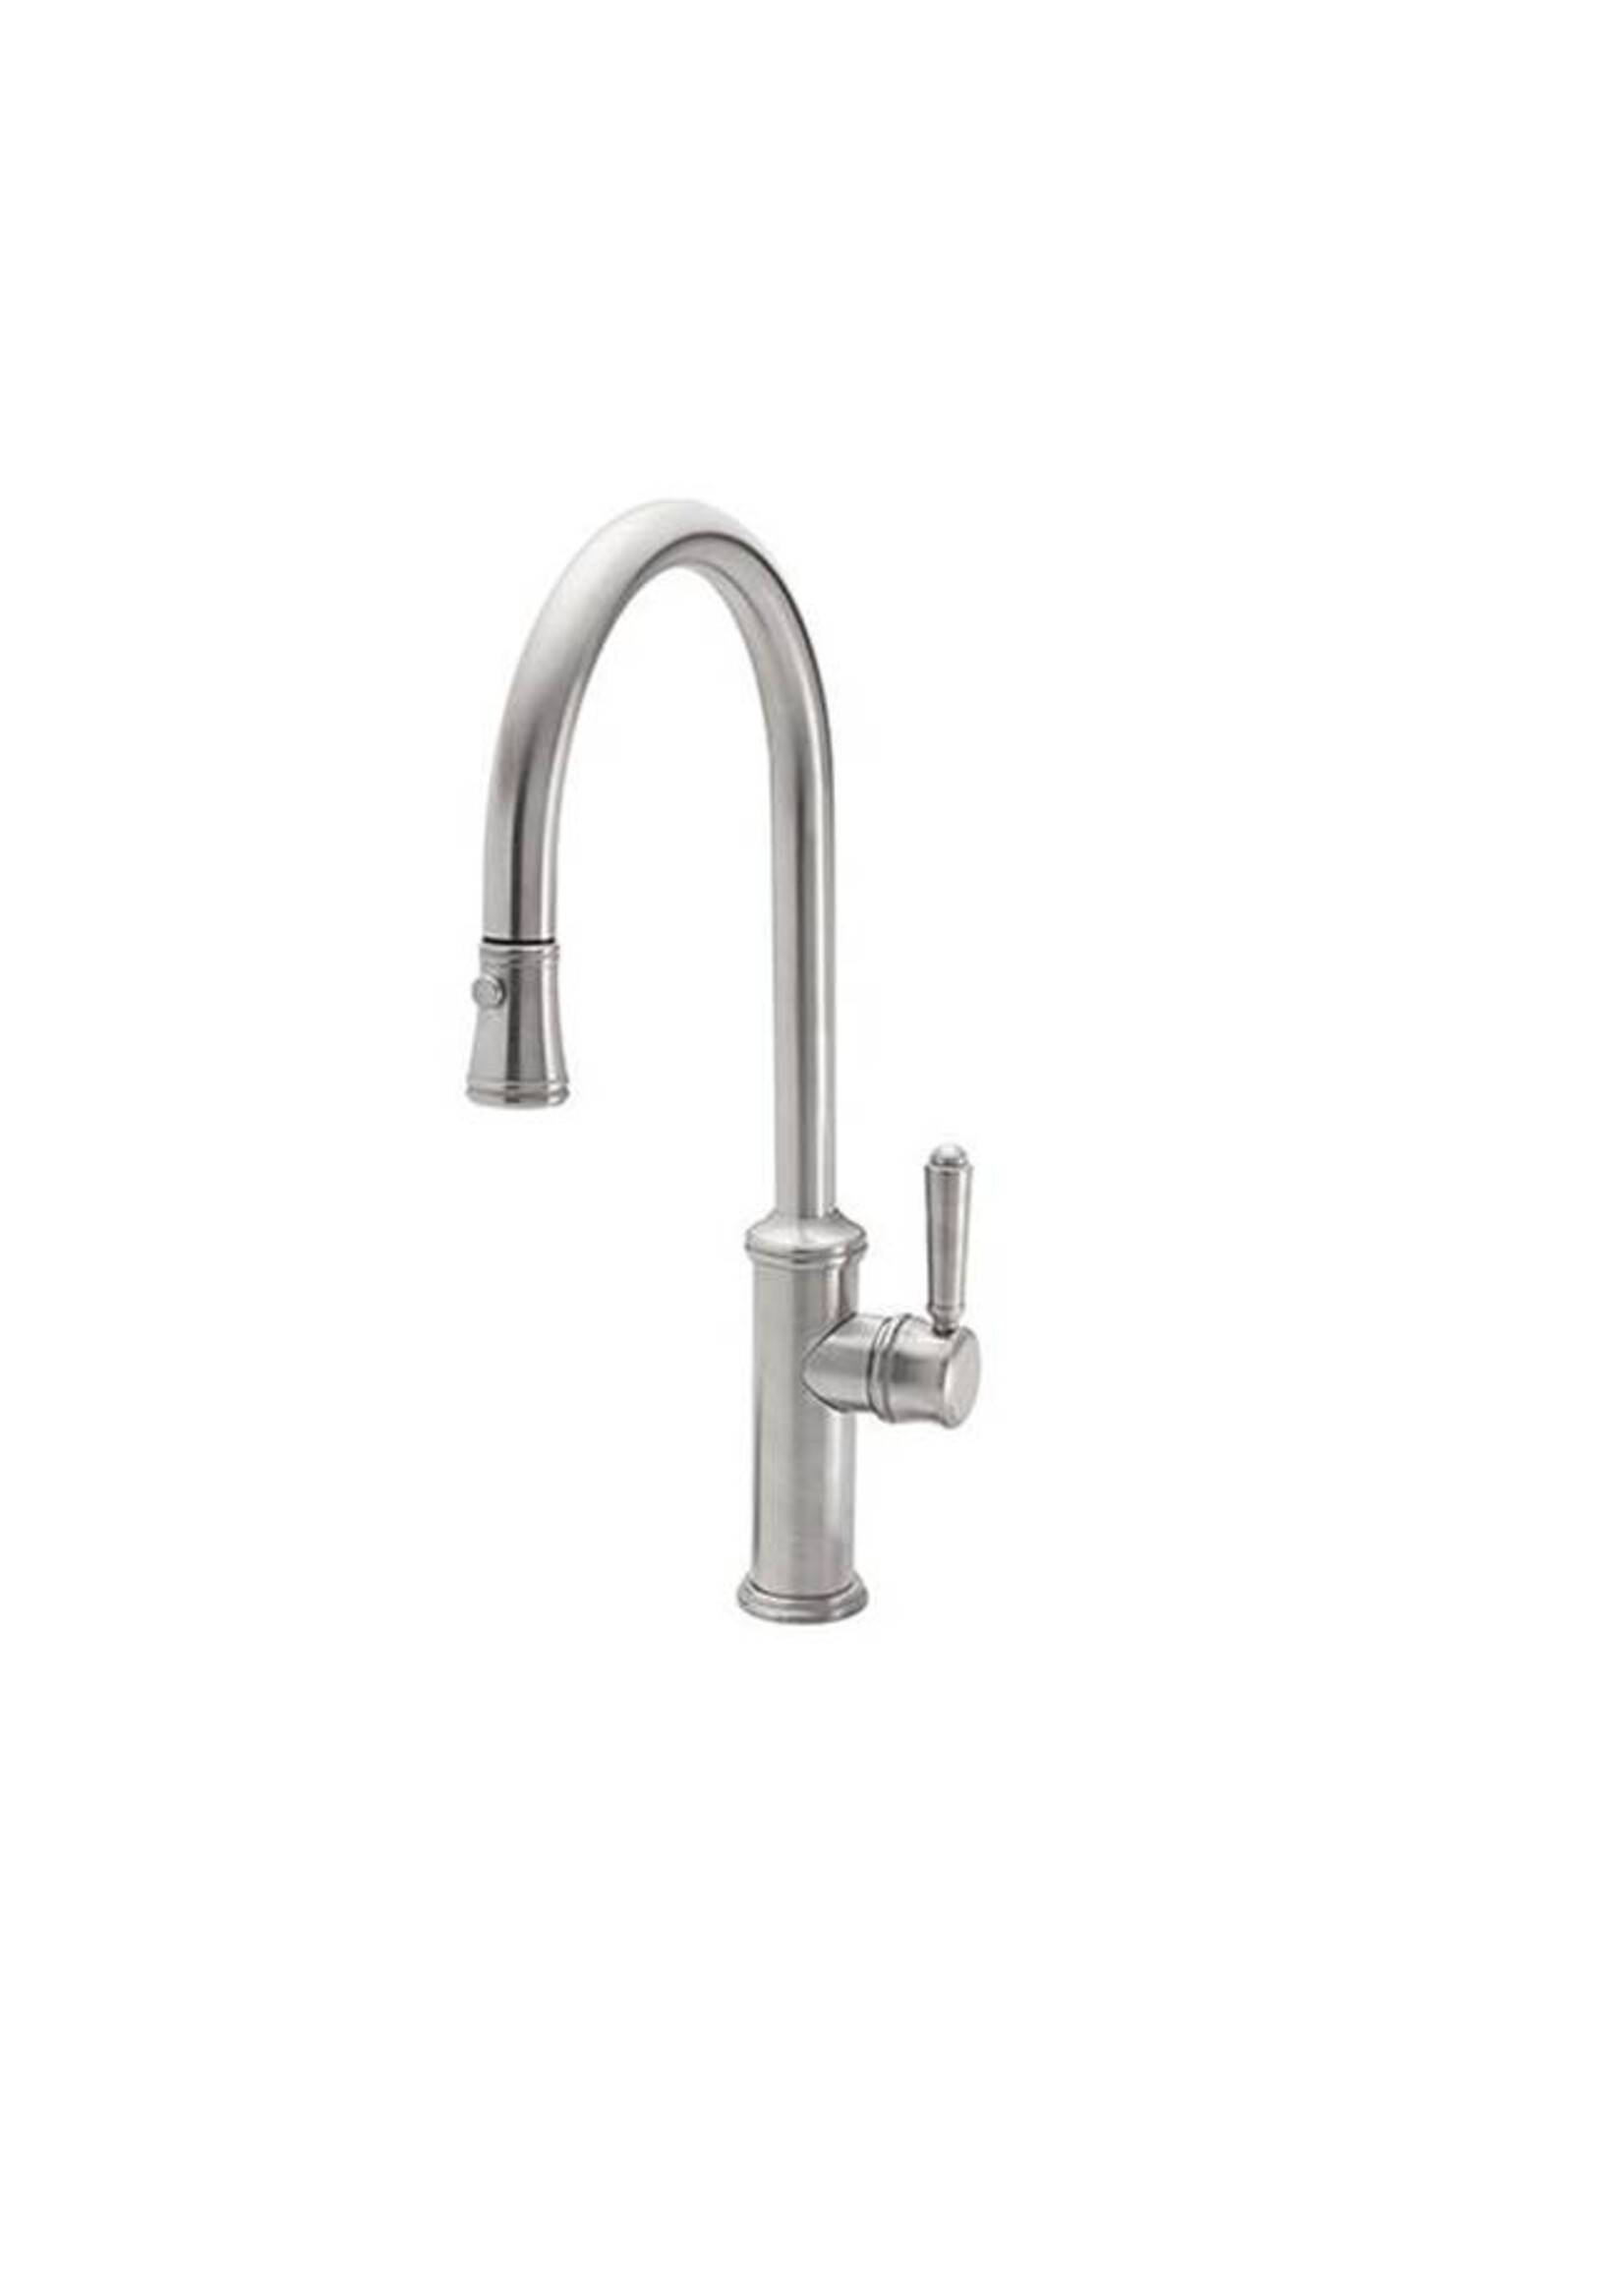 California Faucets California Faucets Davoli pull down kitchen faucet High Arc Spout w/button spray Custom HDL